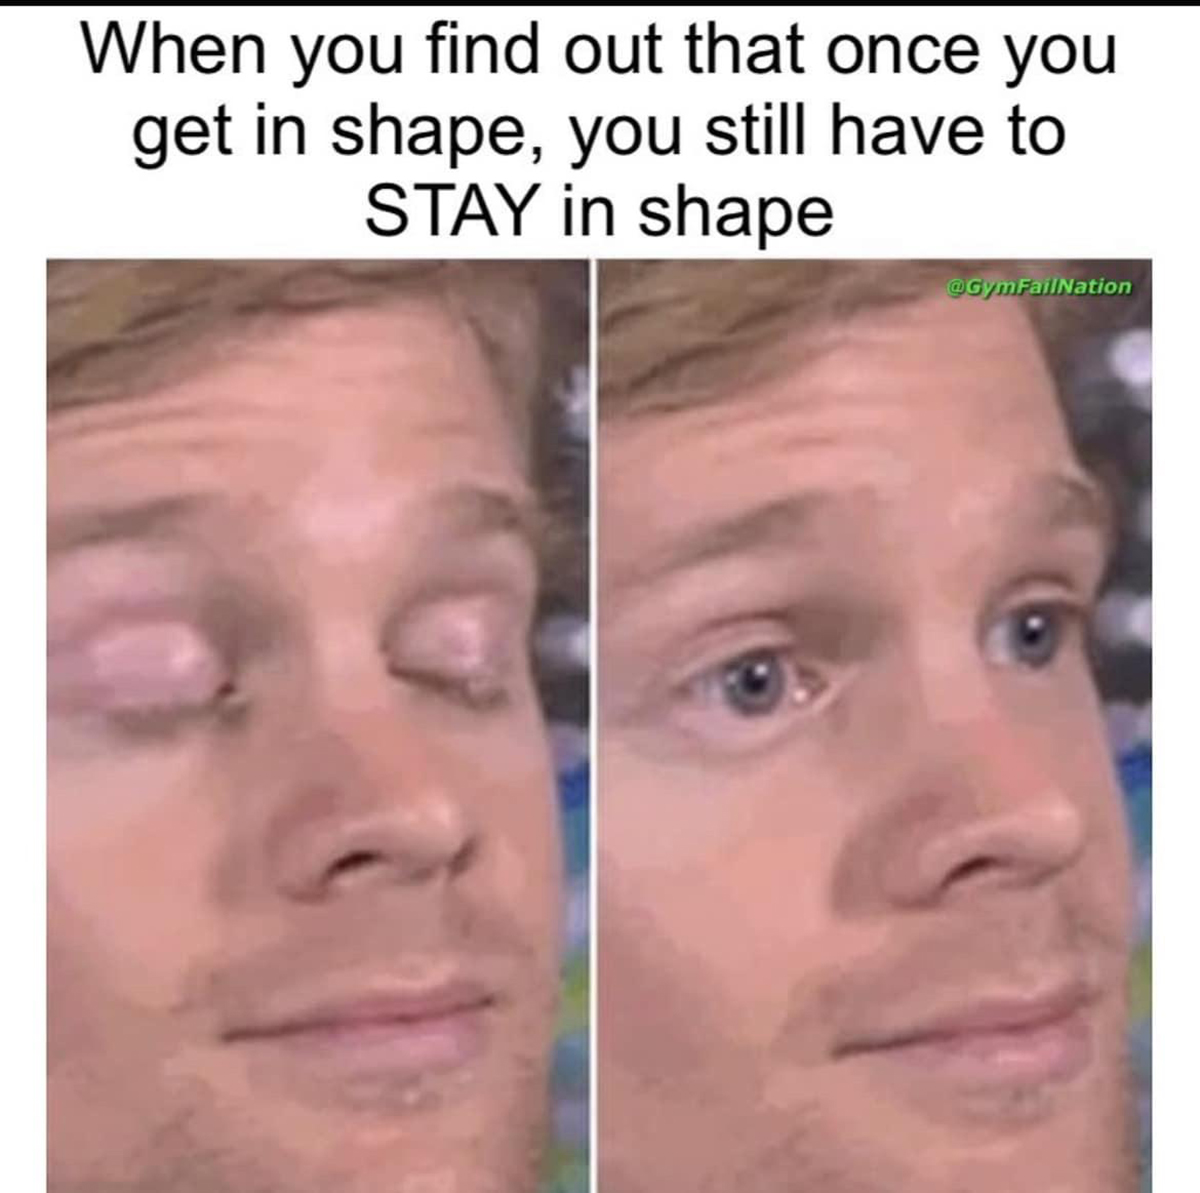 fresh memes - first guy to meme - When you find out that once you get in shape, you still have to Stay in shape CGymFalNation